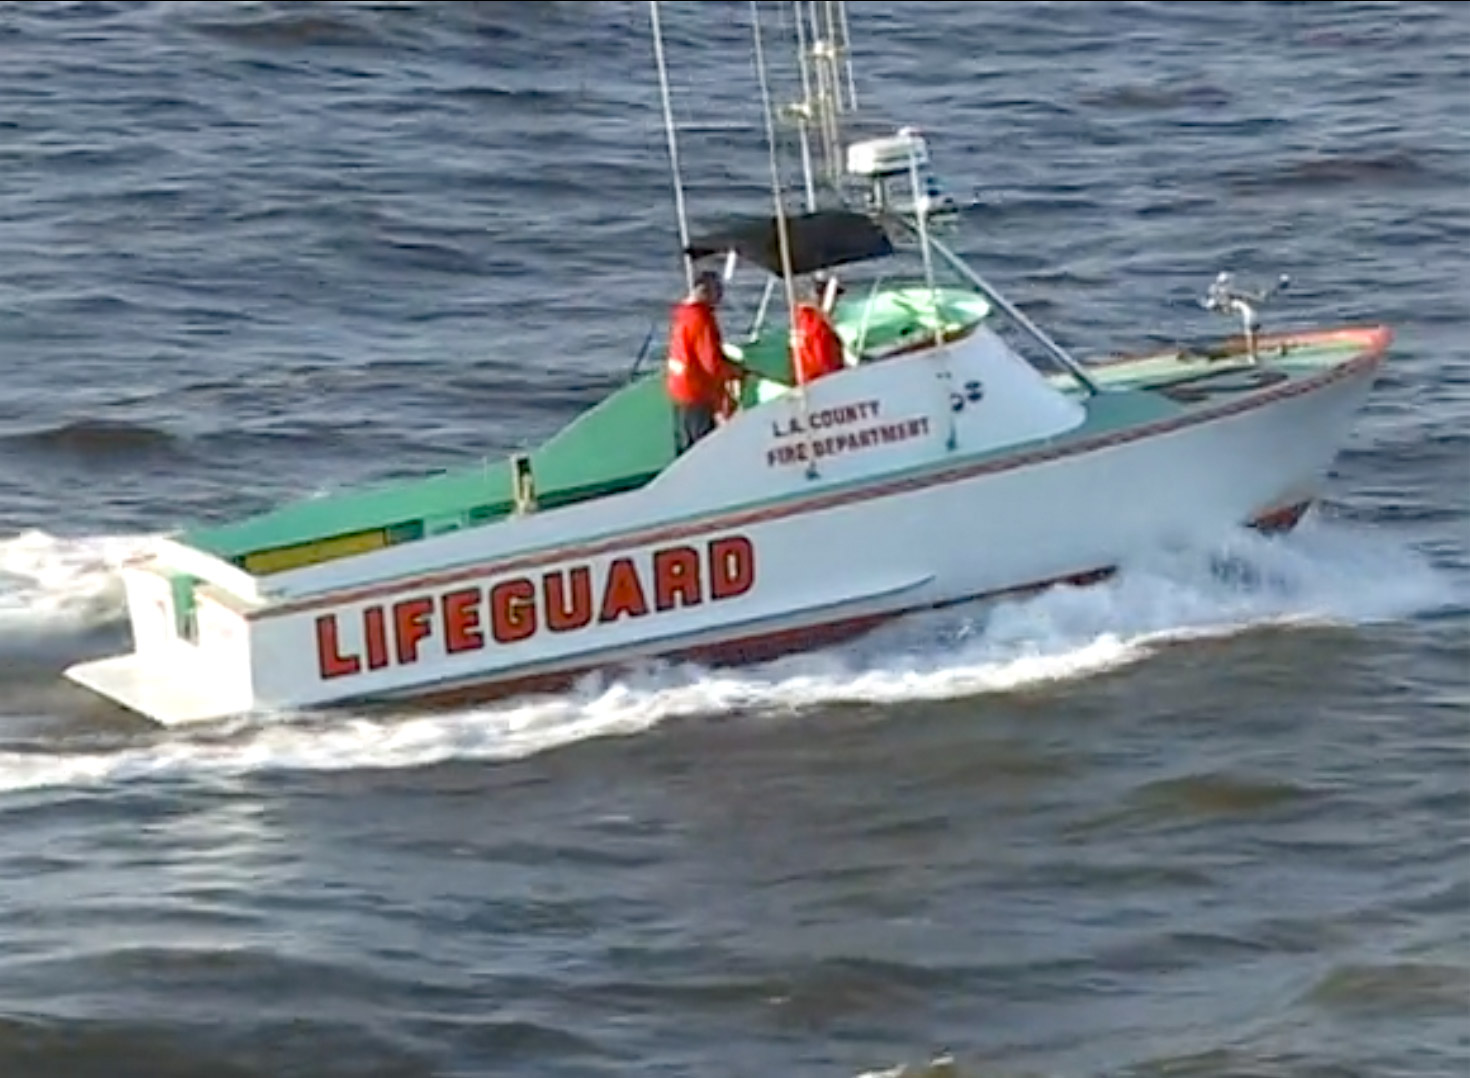 Image of a lifeguard boat in the water.